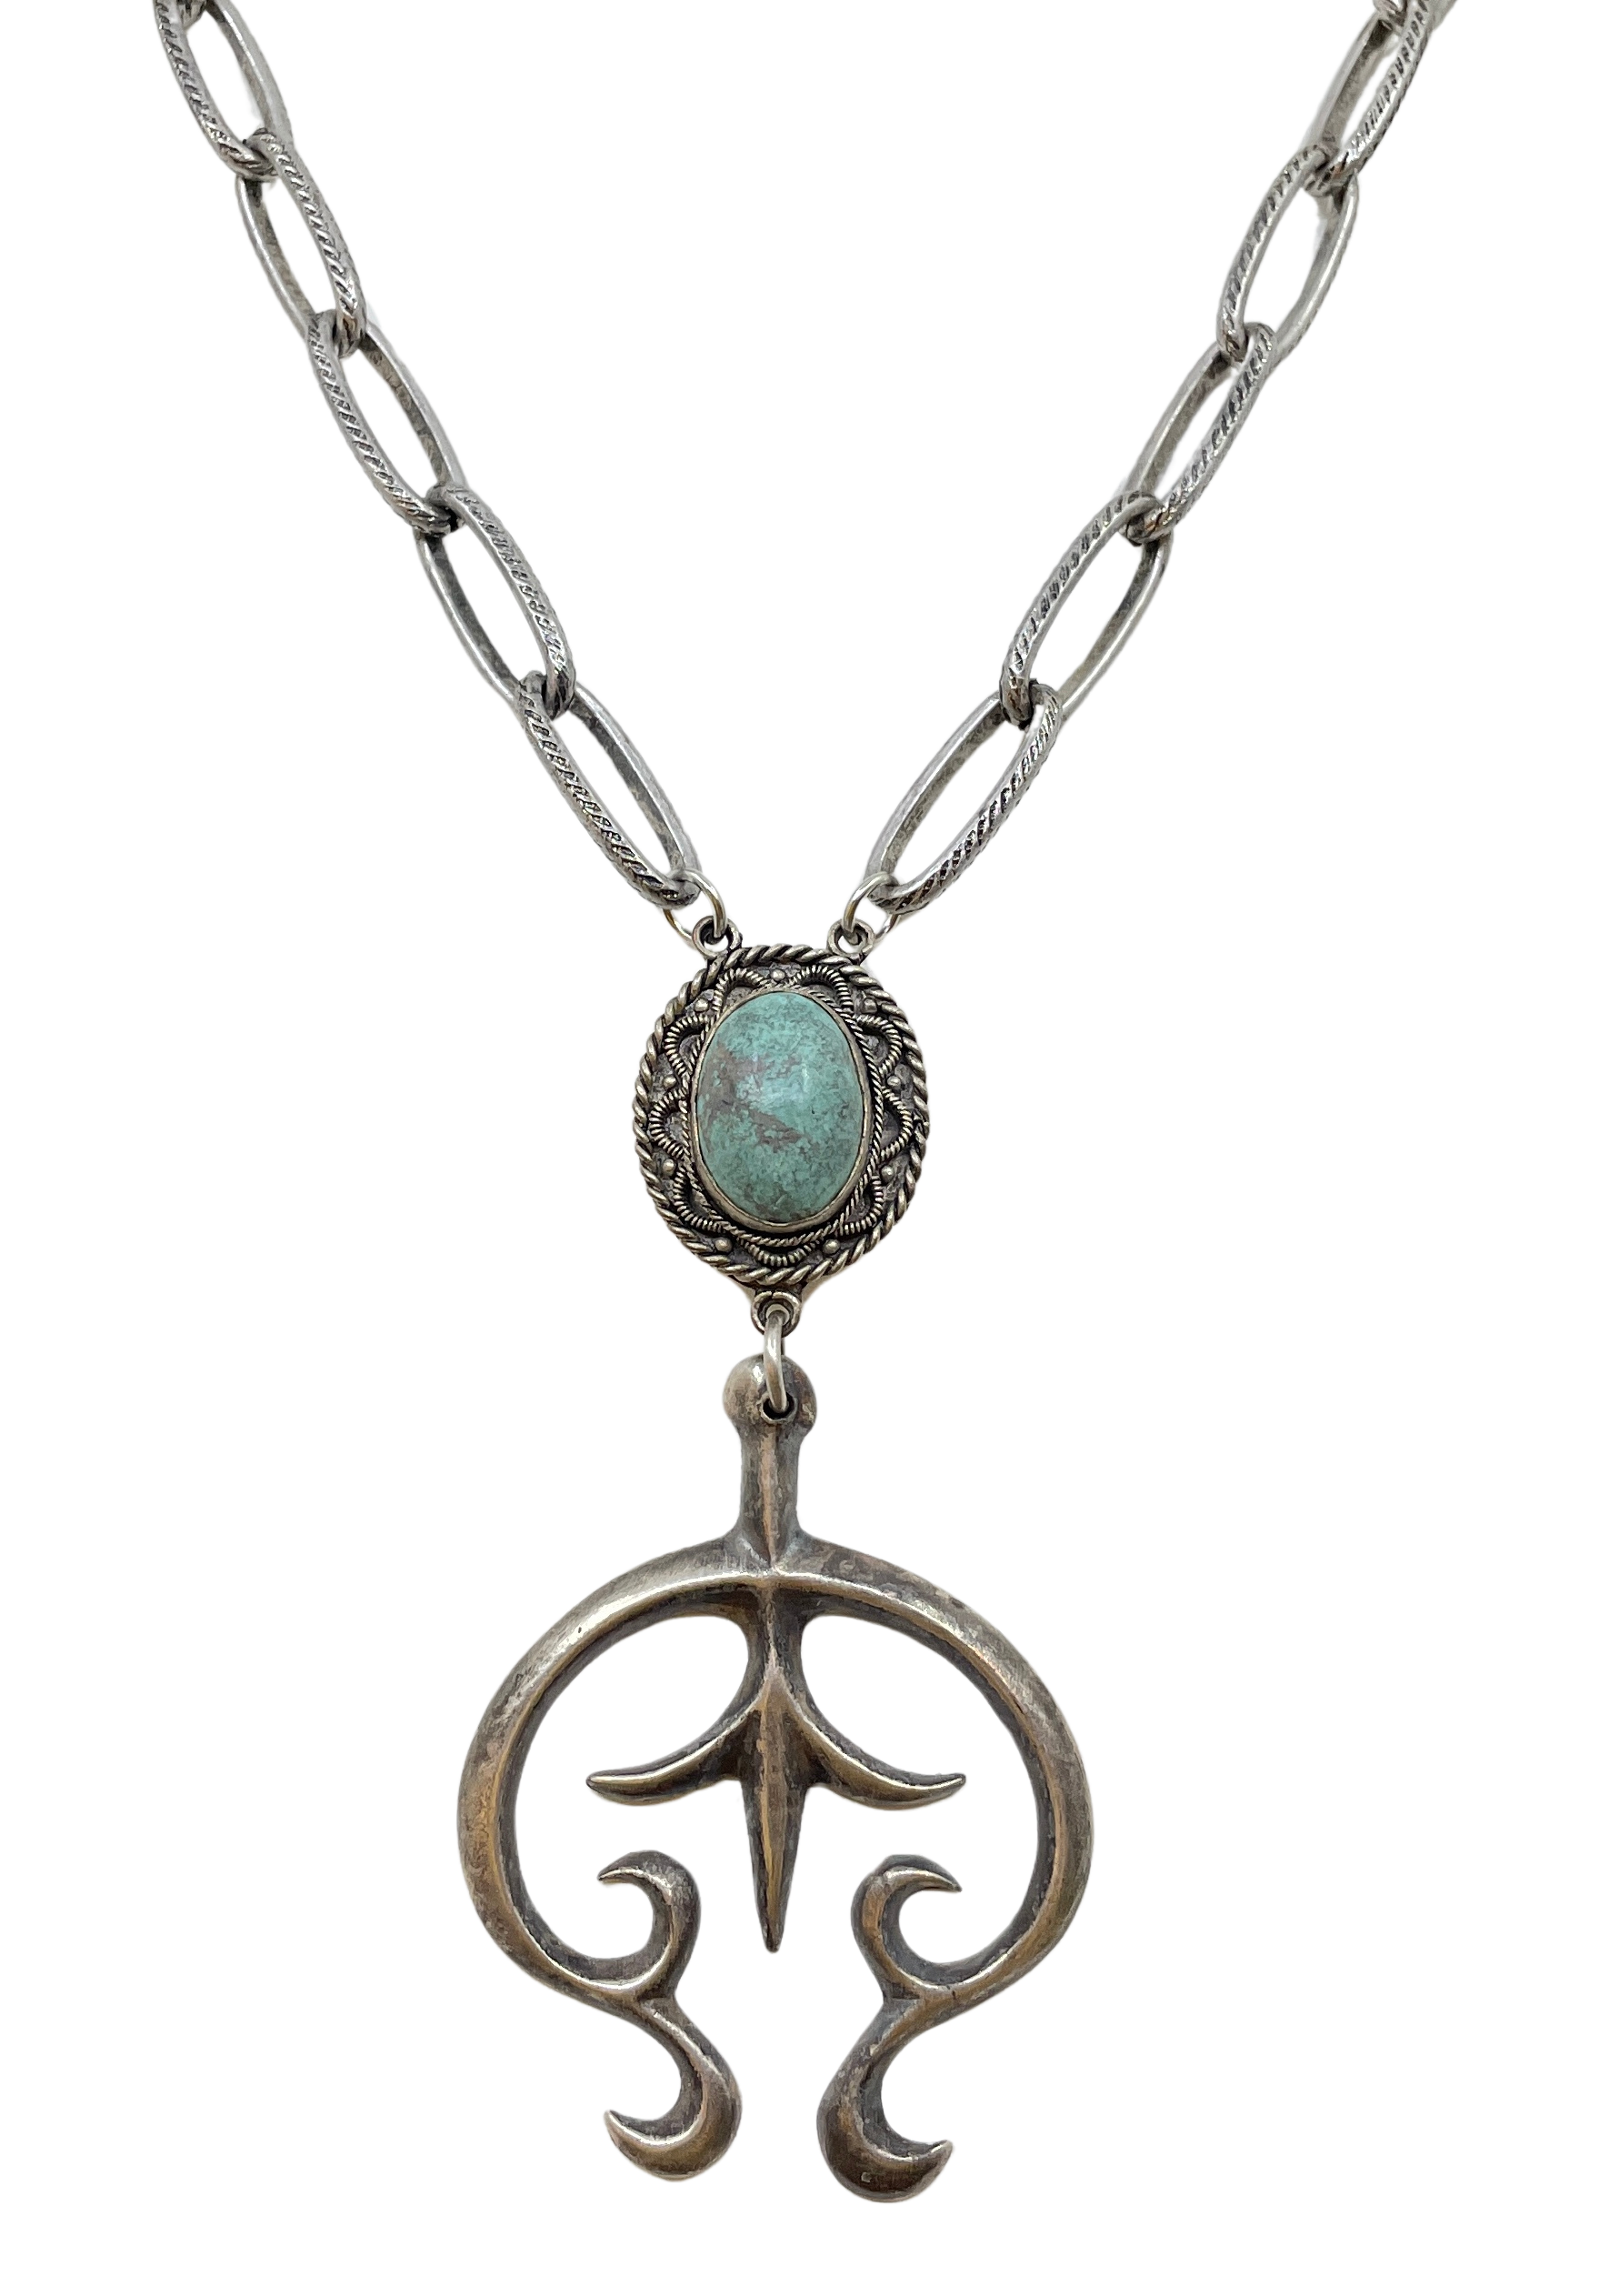 Vintage Turquoise & Sterling Naja Pendant Necklace